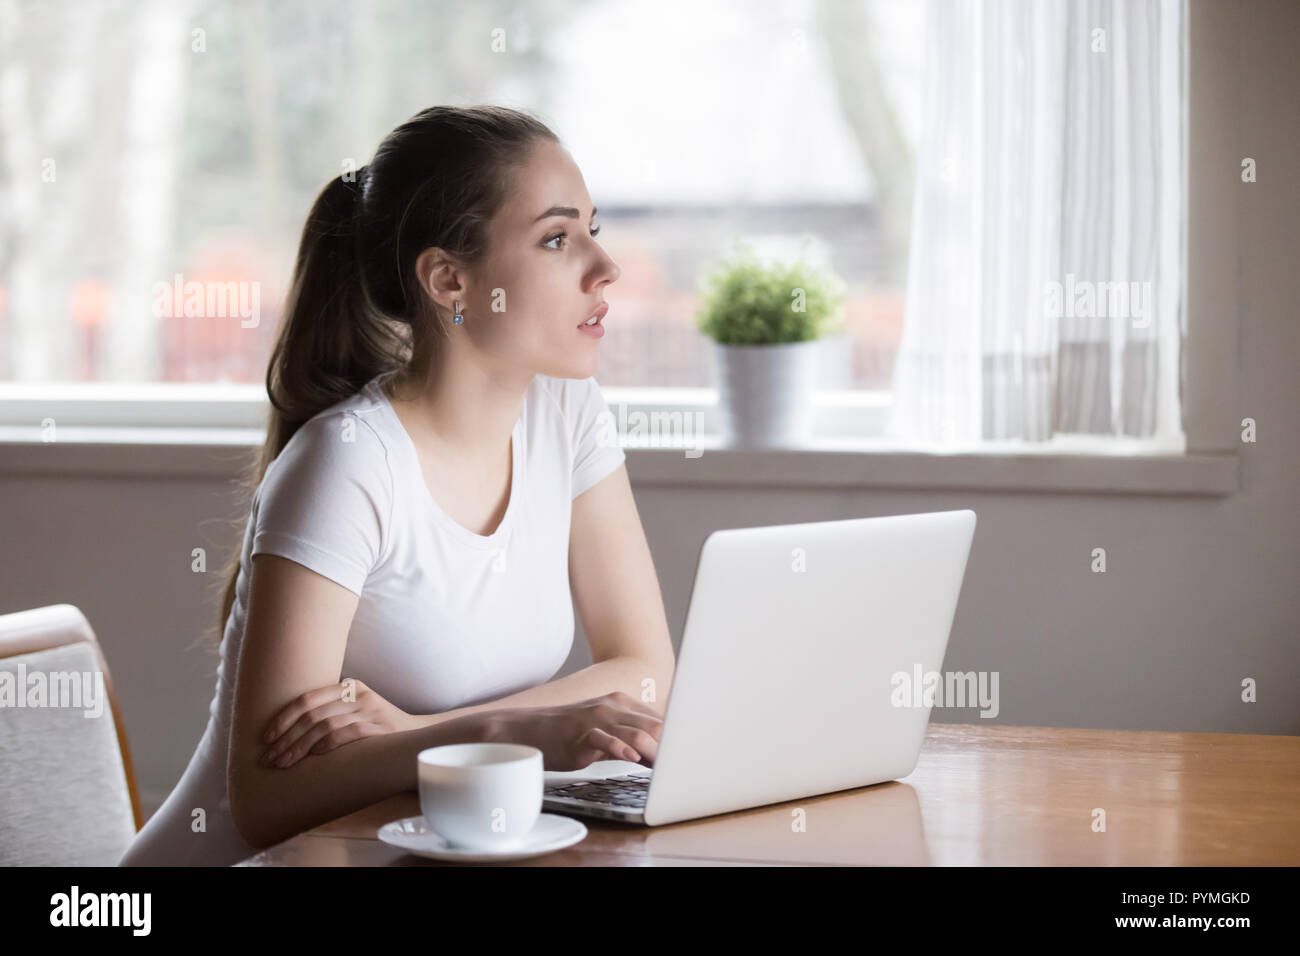 Serious pensive woman using laptop sitting in the kitchen Stock Photo